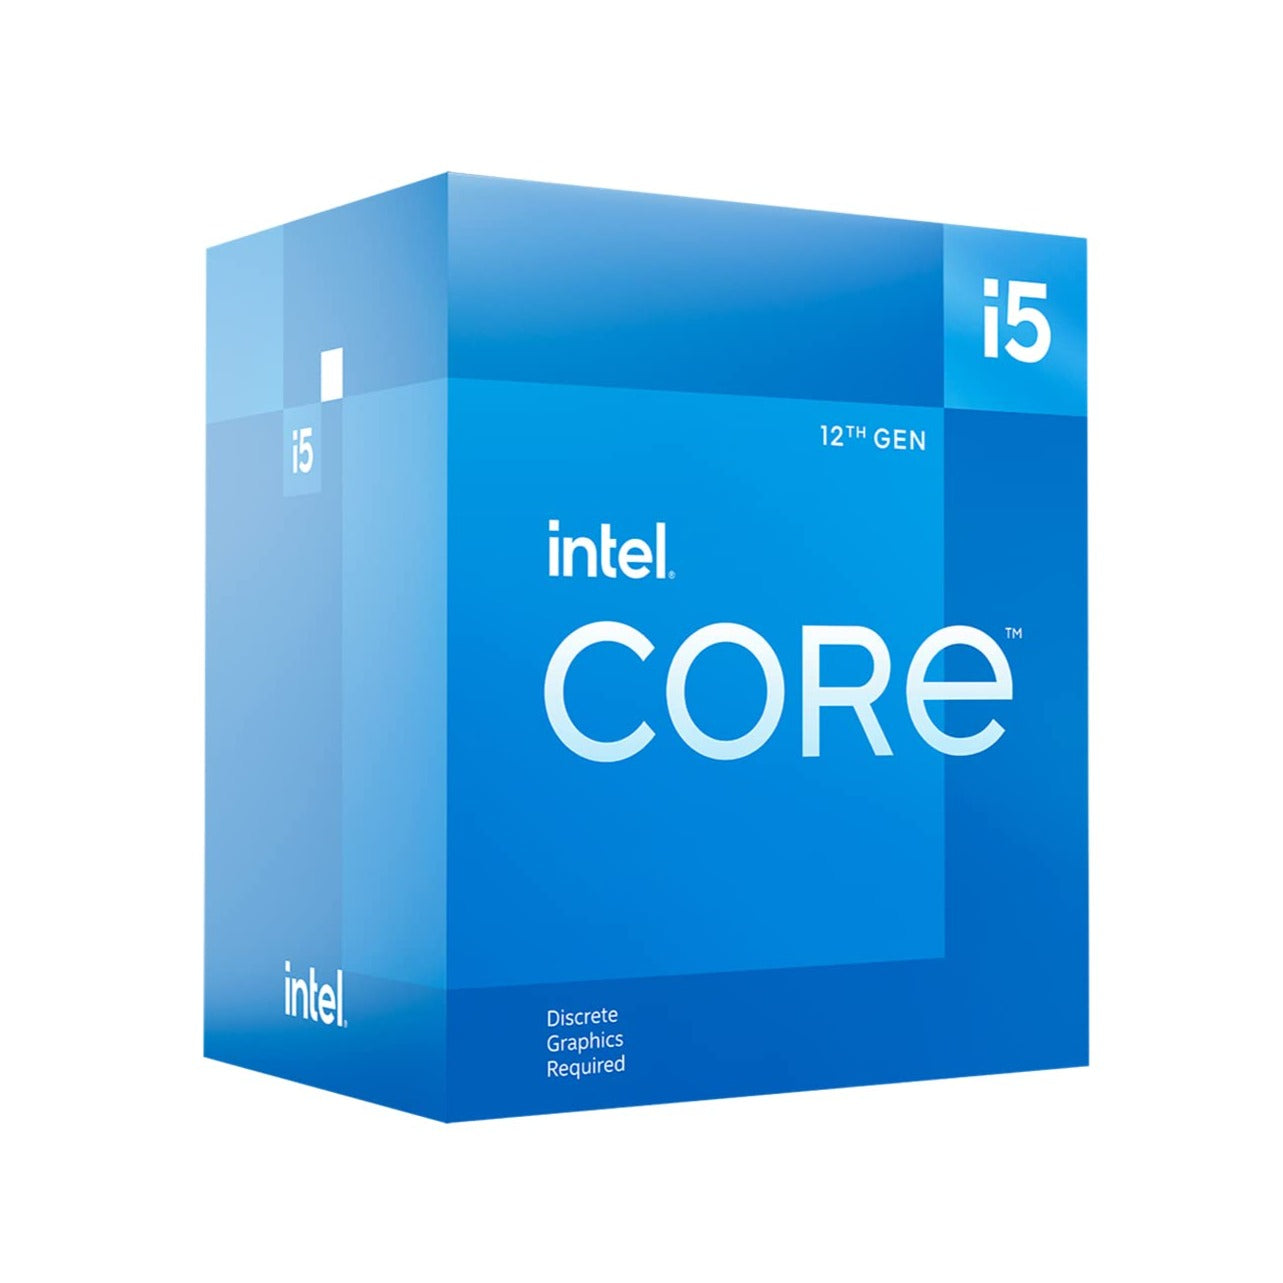 Intel Core i5-12400F 12th Generation 6-Core Desktop Processor with 4.40 GHz Max Turbo Frequency, 18 MB Intel Smart Cache, DDR5 4800 MT/s, and LGA1700 Socket from INTEL